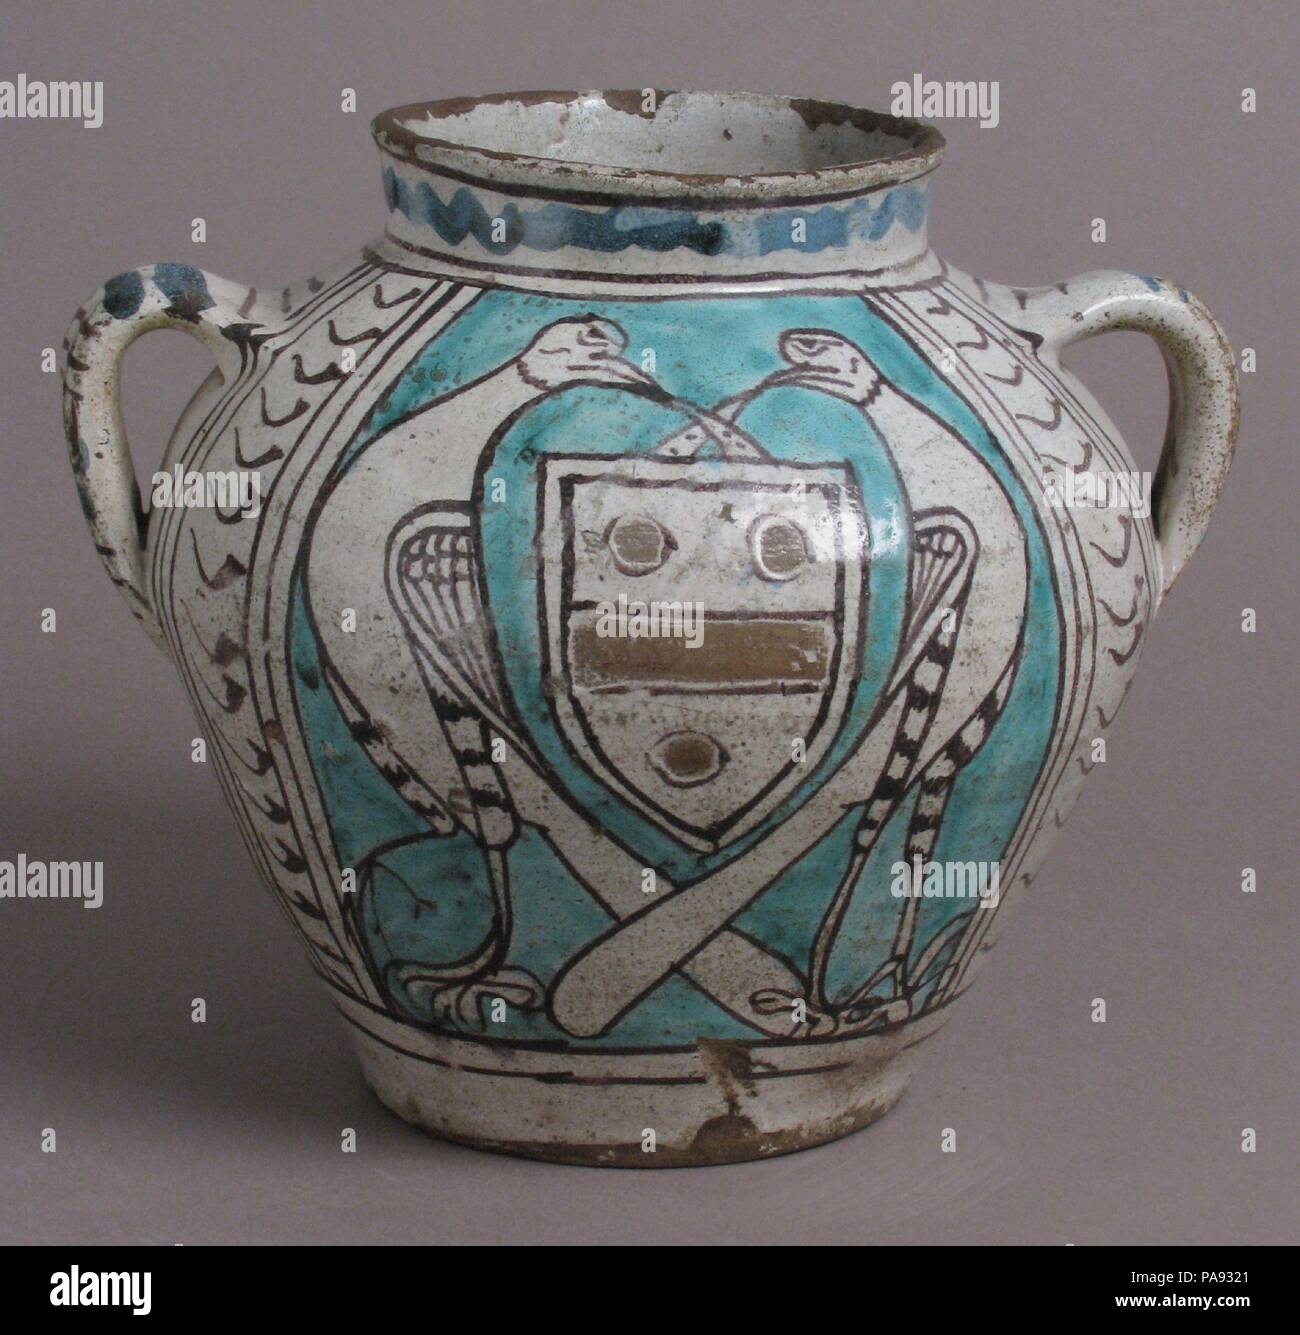 Two-Handled Jar with Birds and a Coat of Arms. Culture: Italian. Dimensions: Overall: 8 1/4 x 9 3/4 x 8 7/16 in. (21 x 24.8 x 21.5 cm). Date: early 1400s.  From 1400 on, finely turned and decorated glazed earthenwares have been associated with Florence. It is unlikely, however, that the earlier of these wares were actually made within the city walls, but rather in outlying Tuscan towns such as Montelupo, situated in the Arno valley between Florence and Pisa. Unlike the earlier Italian earthenwares, the so-called Florentine vessels initiated the use of an all-over white to gray tin-enamel glaze Stock Photo